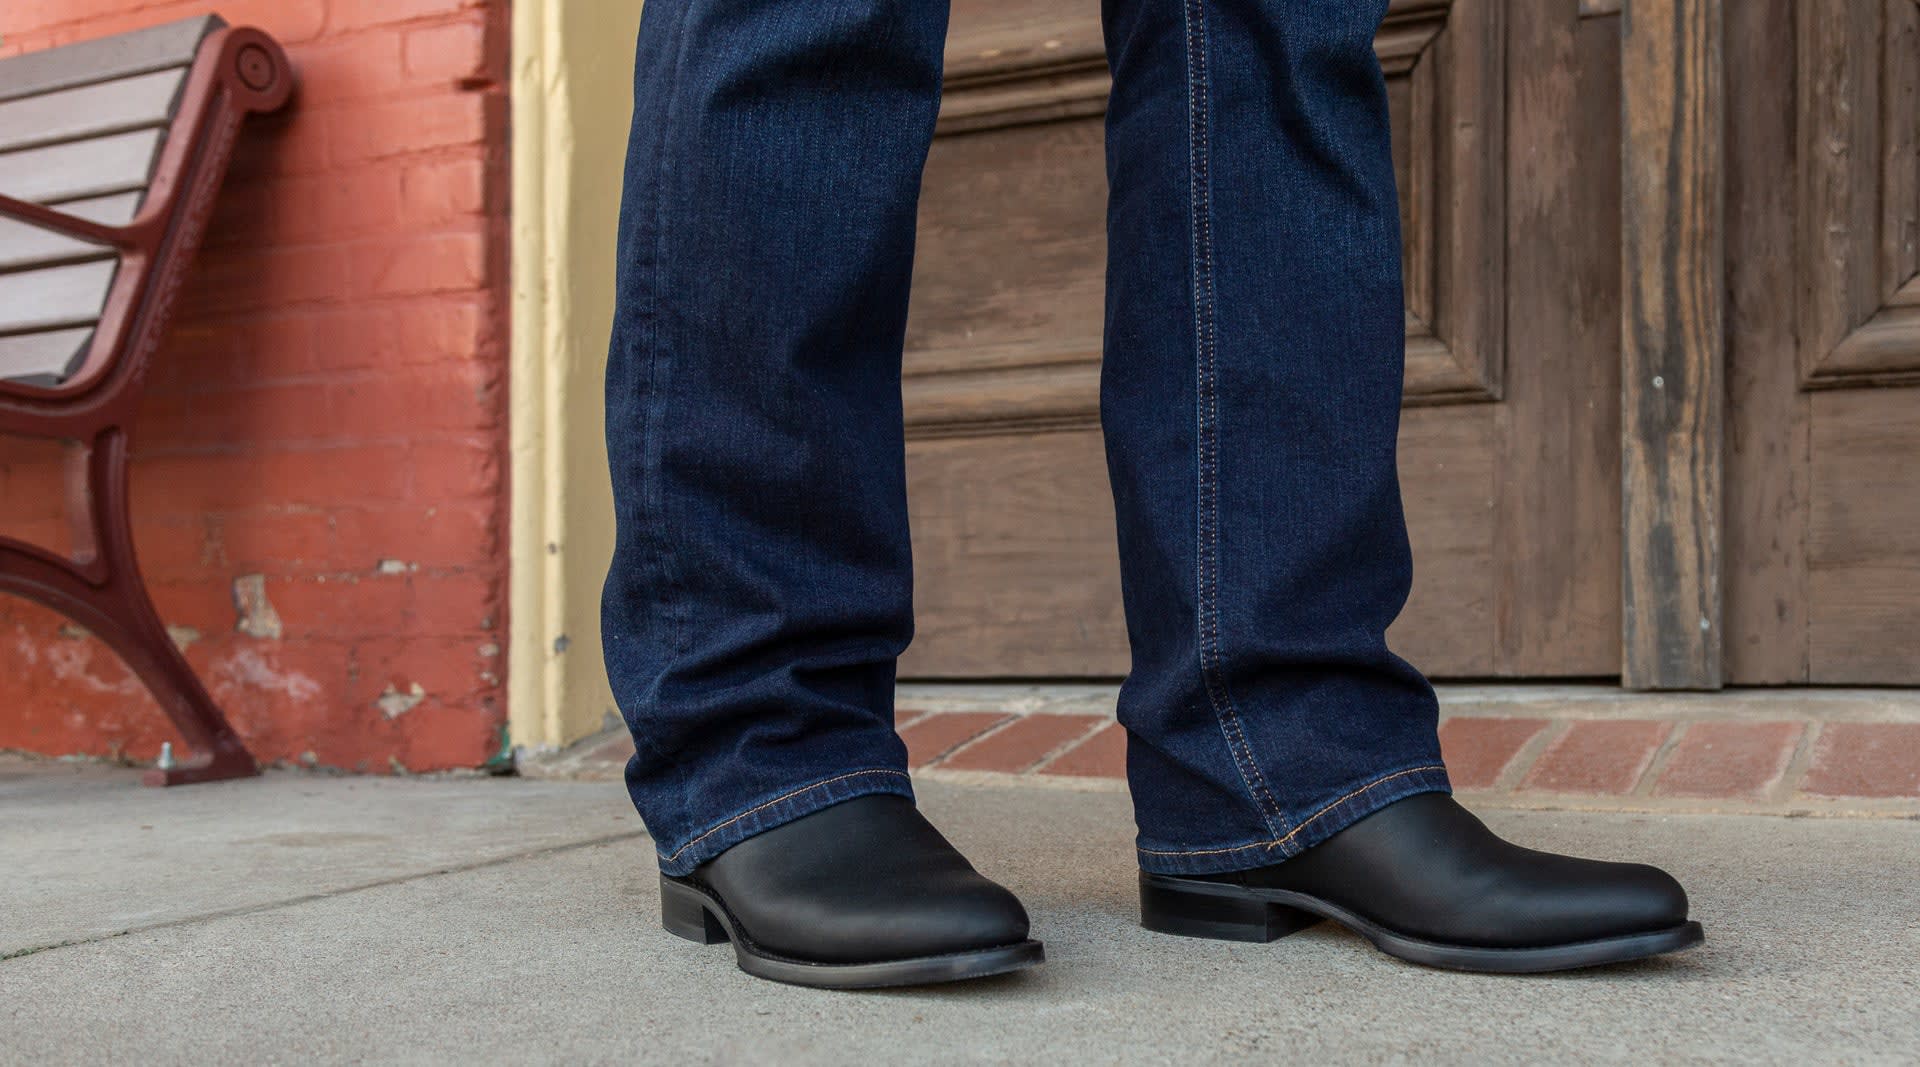 man in black boots and jeans